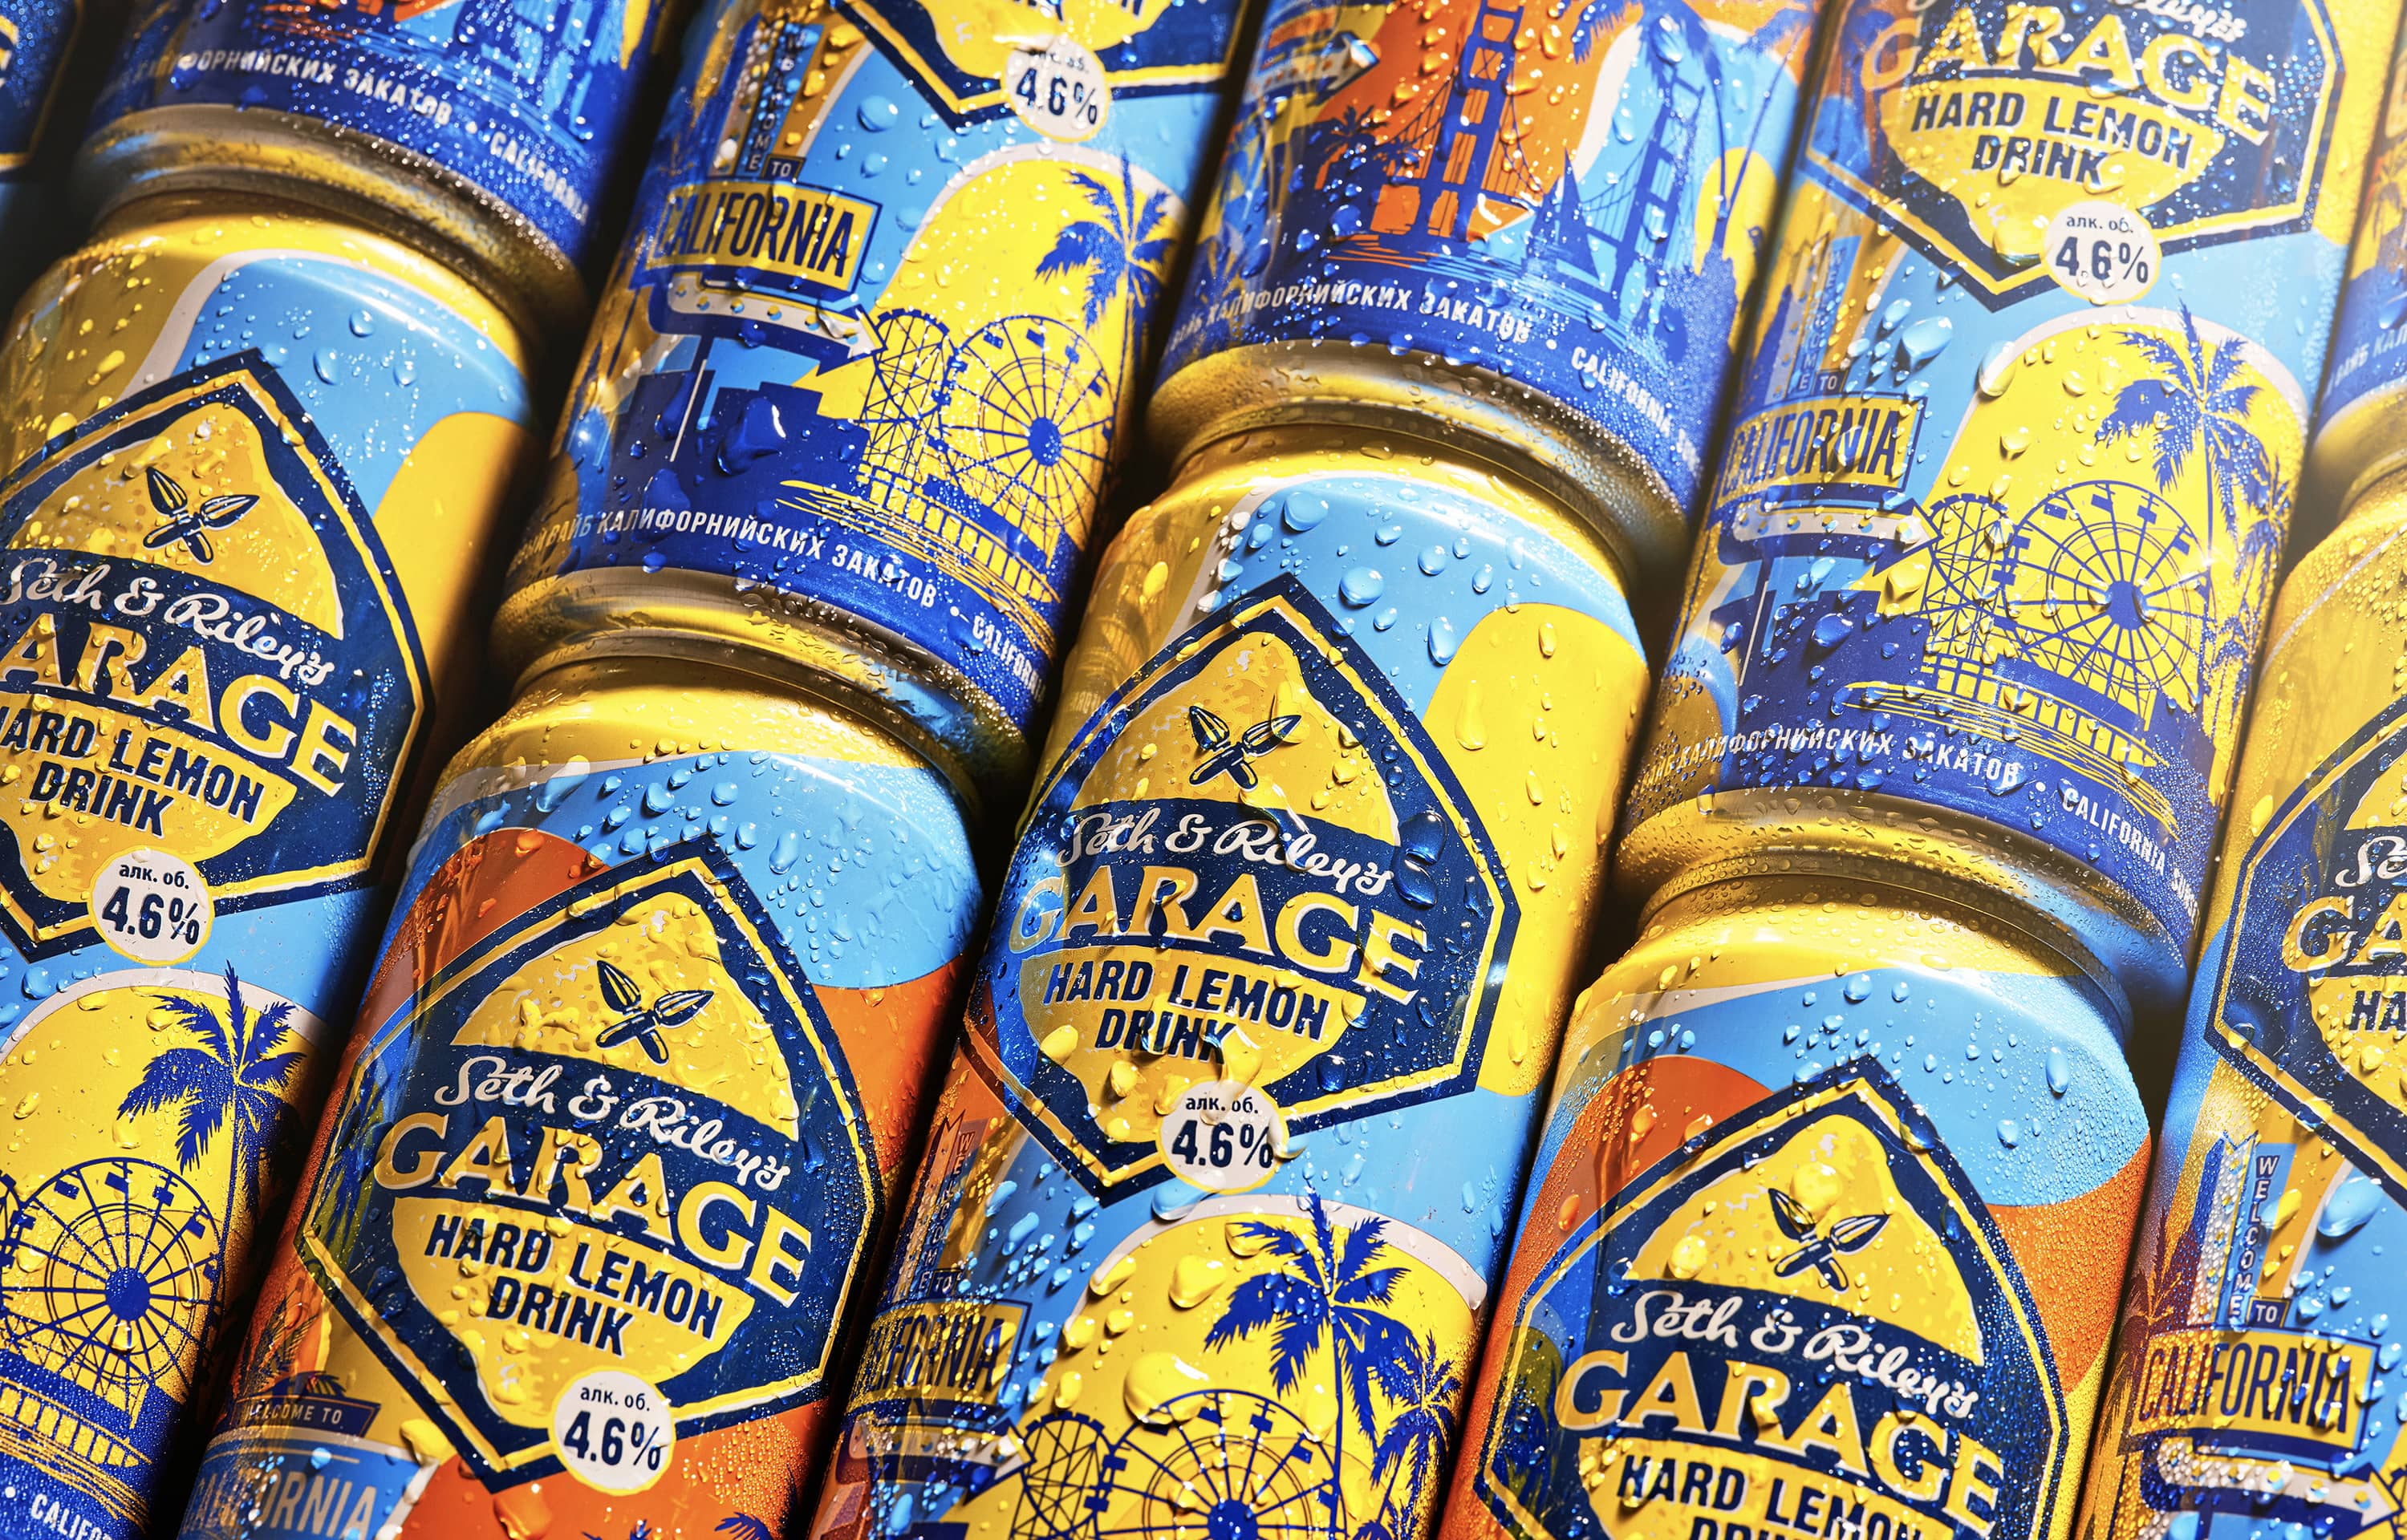 Packaging Design for Garage Limited Edition